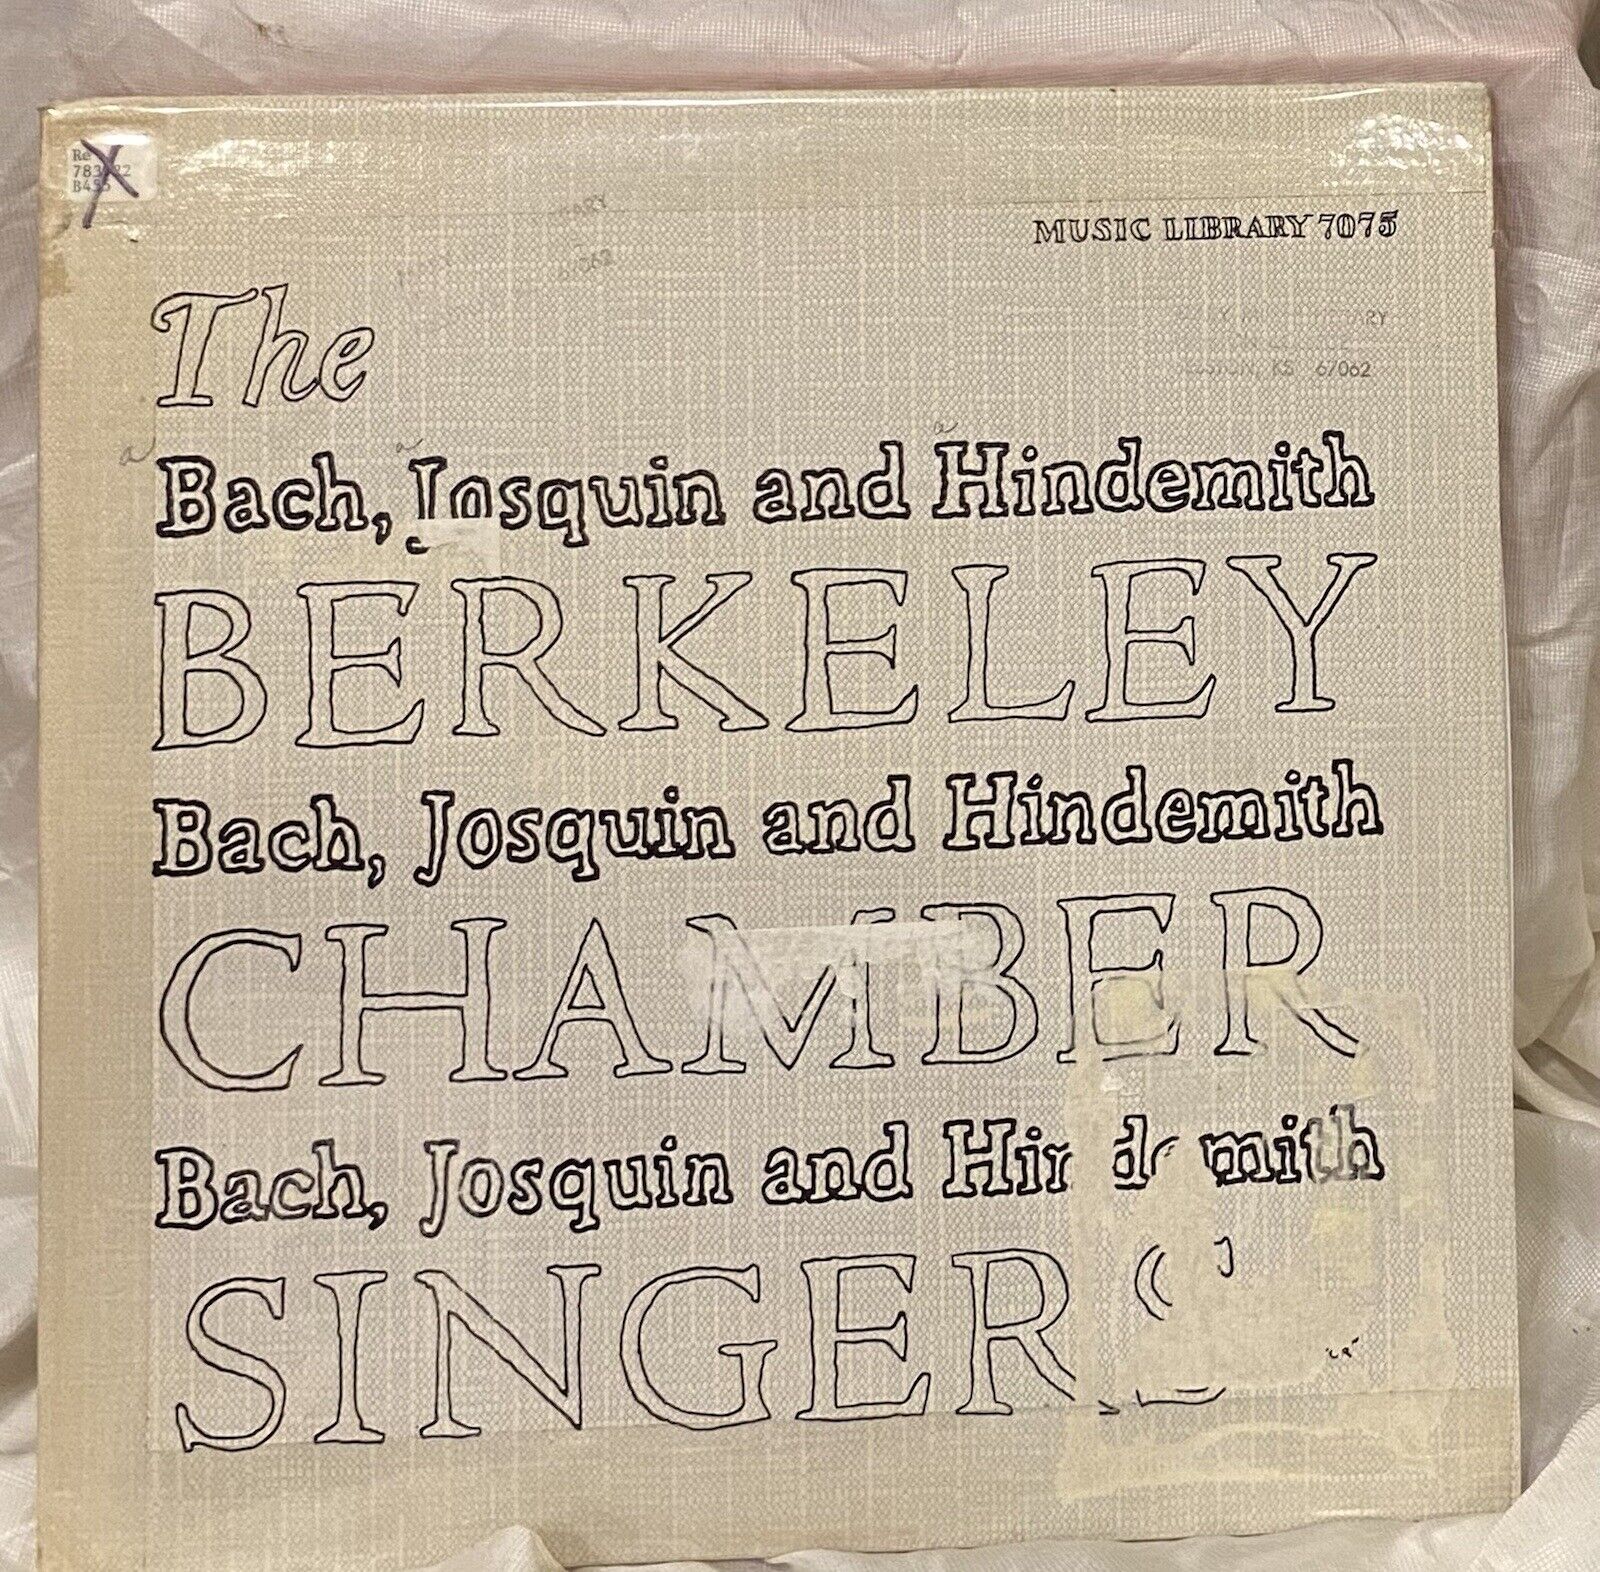 The Berkeley Chamber Singers - Bach, Josquin, & Hindemith - vintage LP, 1958